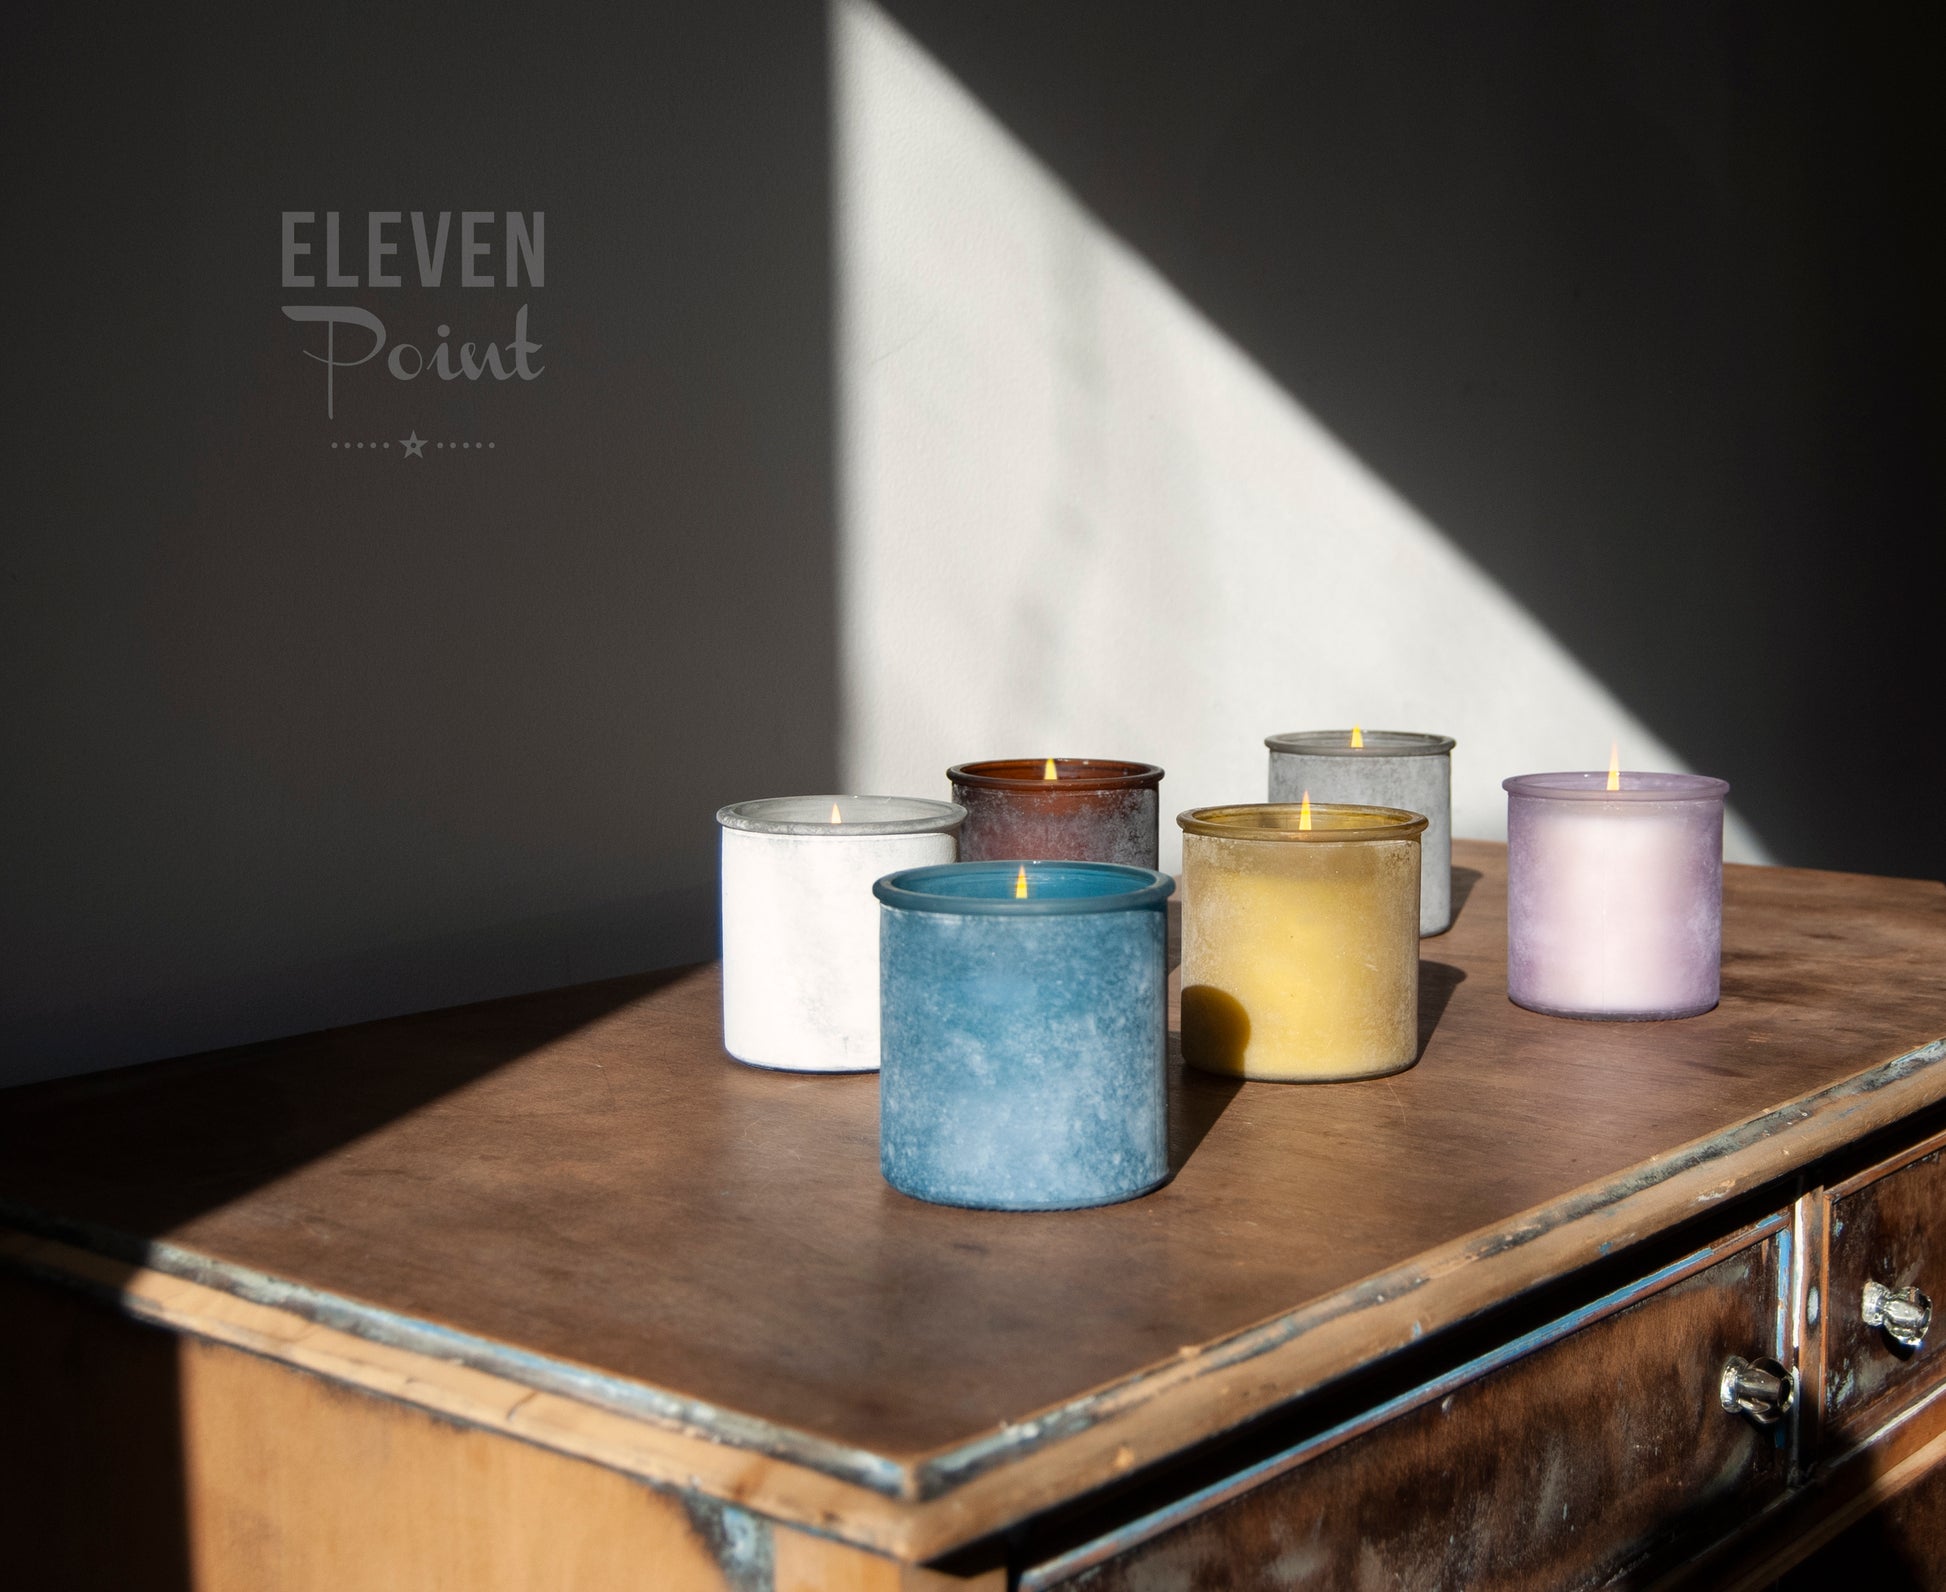 The River Rock Candle in Amber Candle Eleven Point   